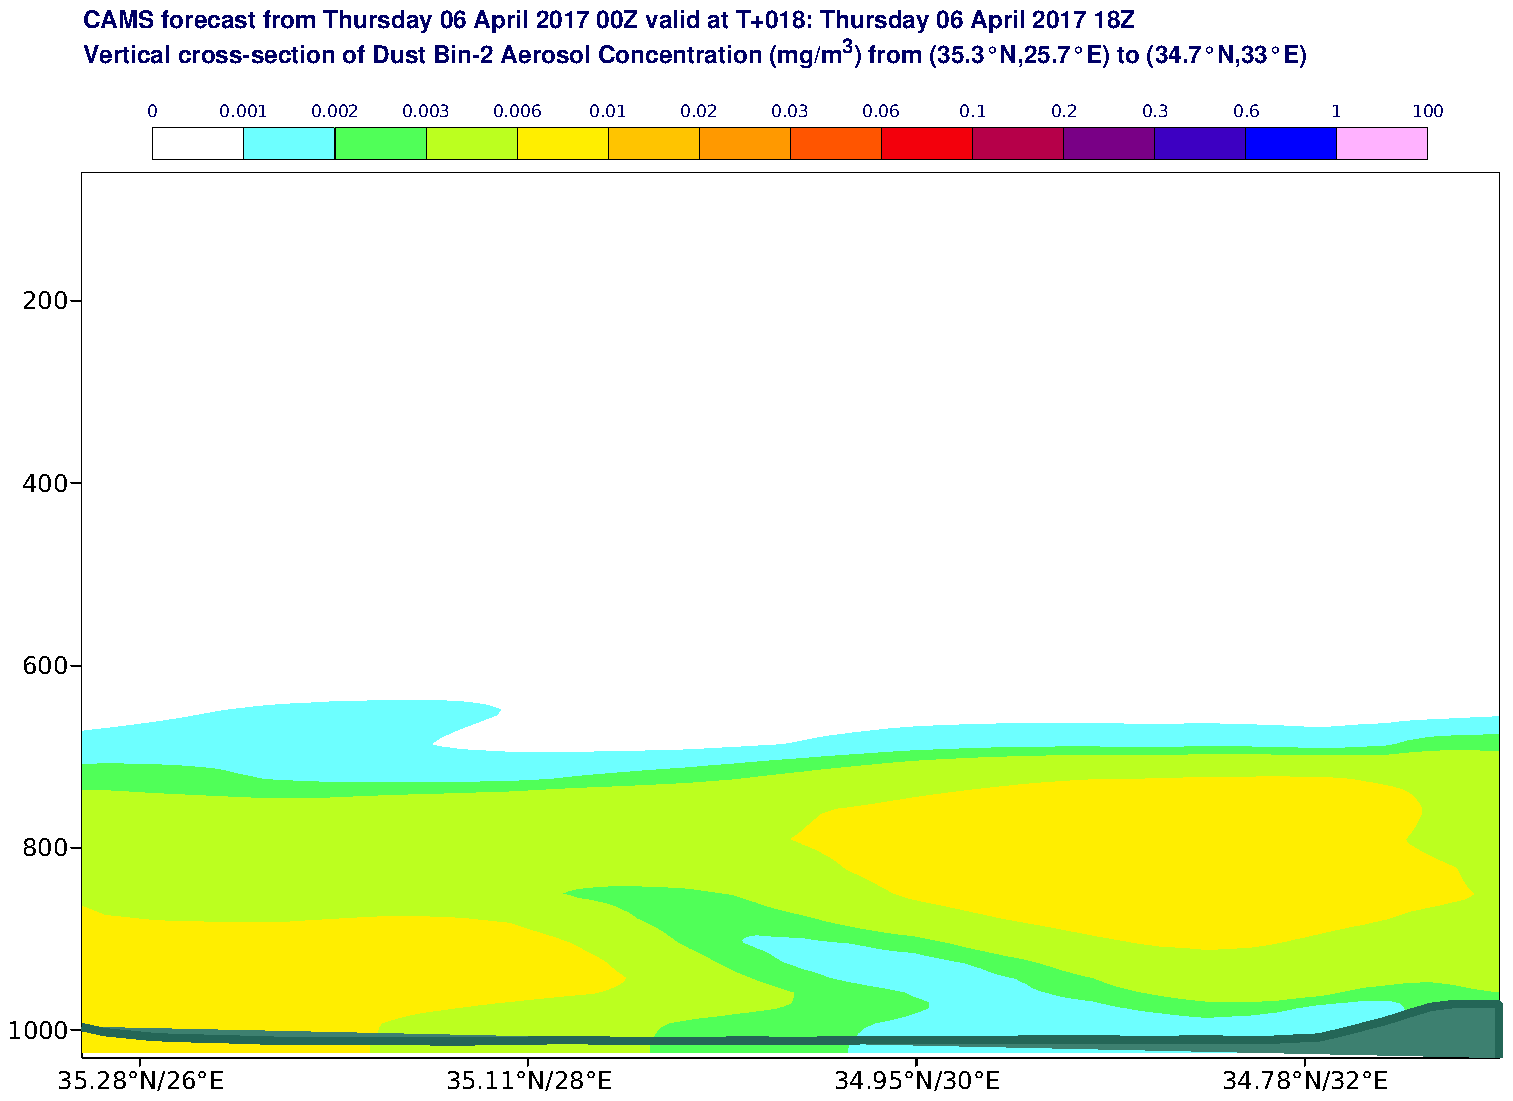 Vertical cross-section of Dust Bin-2 Aerosol Concentration (mg/m3) valid at T18 - 2017-04-06 18:00